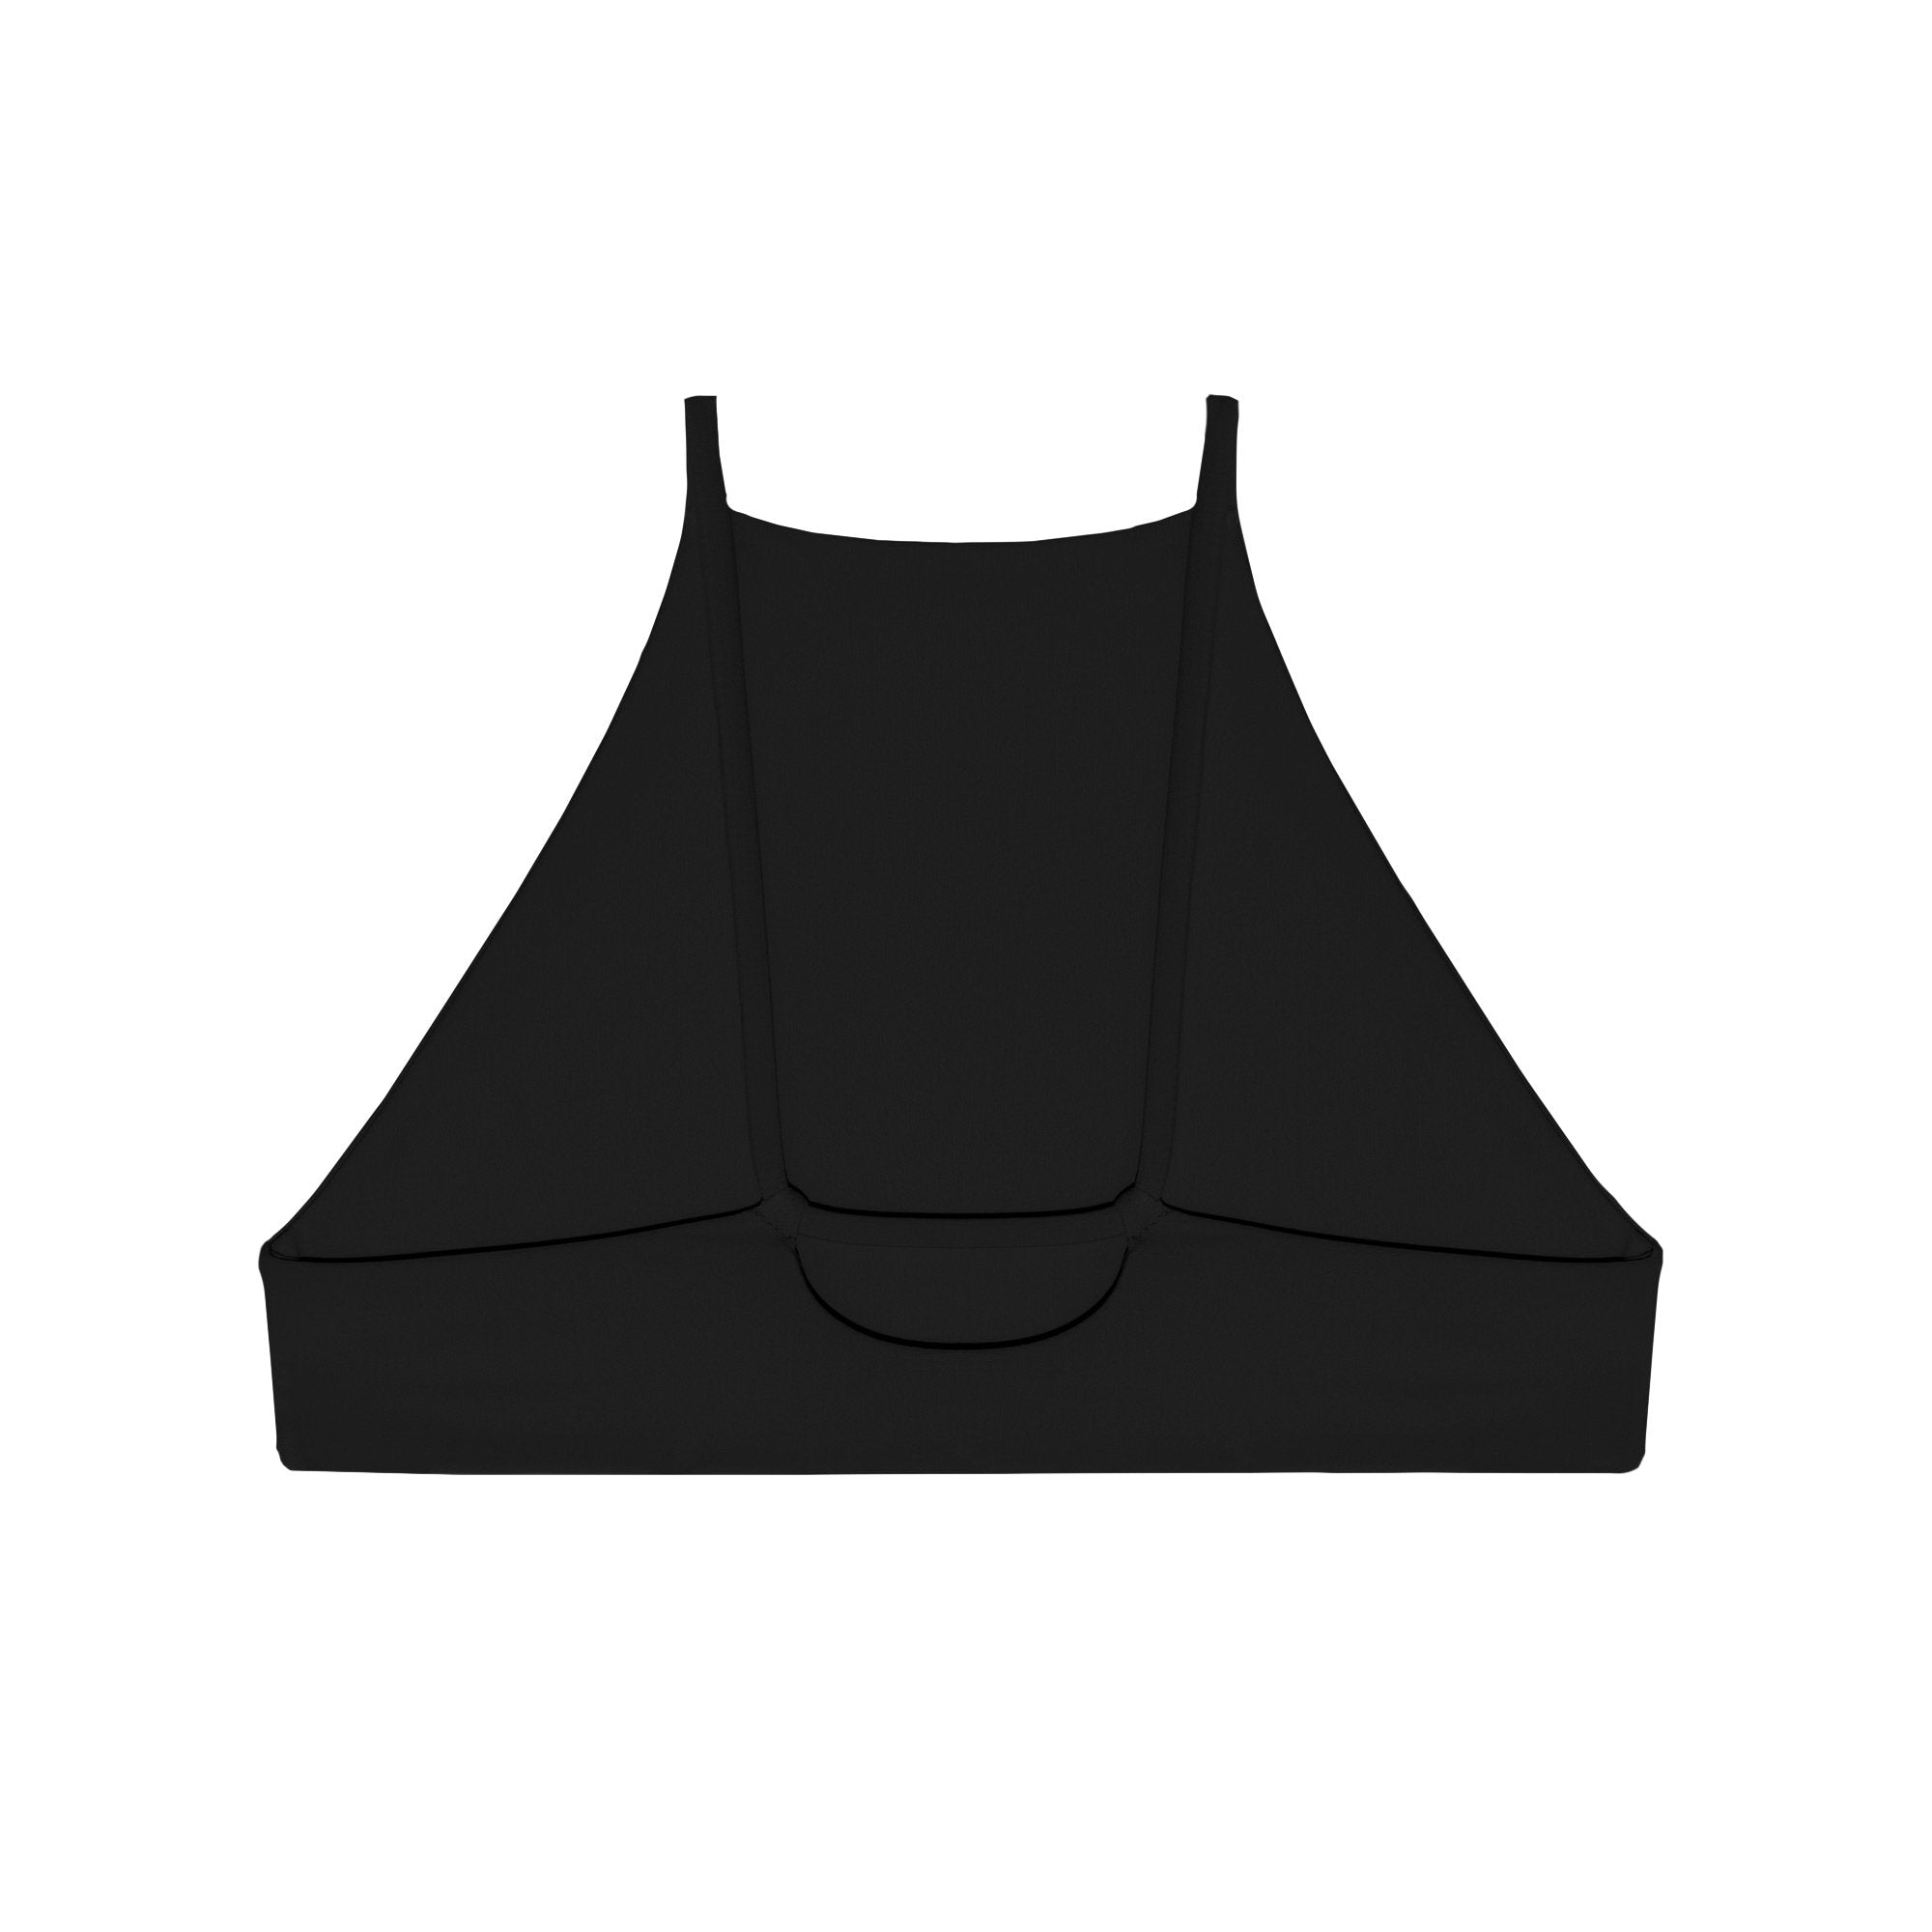 Load image into Gallery viewer, Flat image of the back of the Nova Top in black